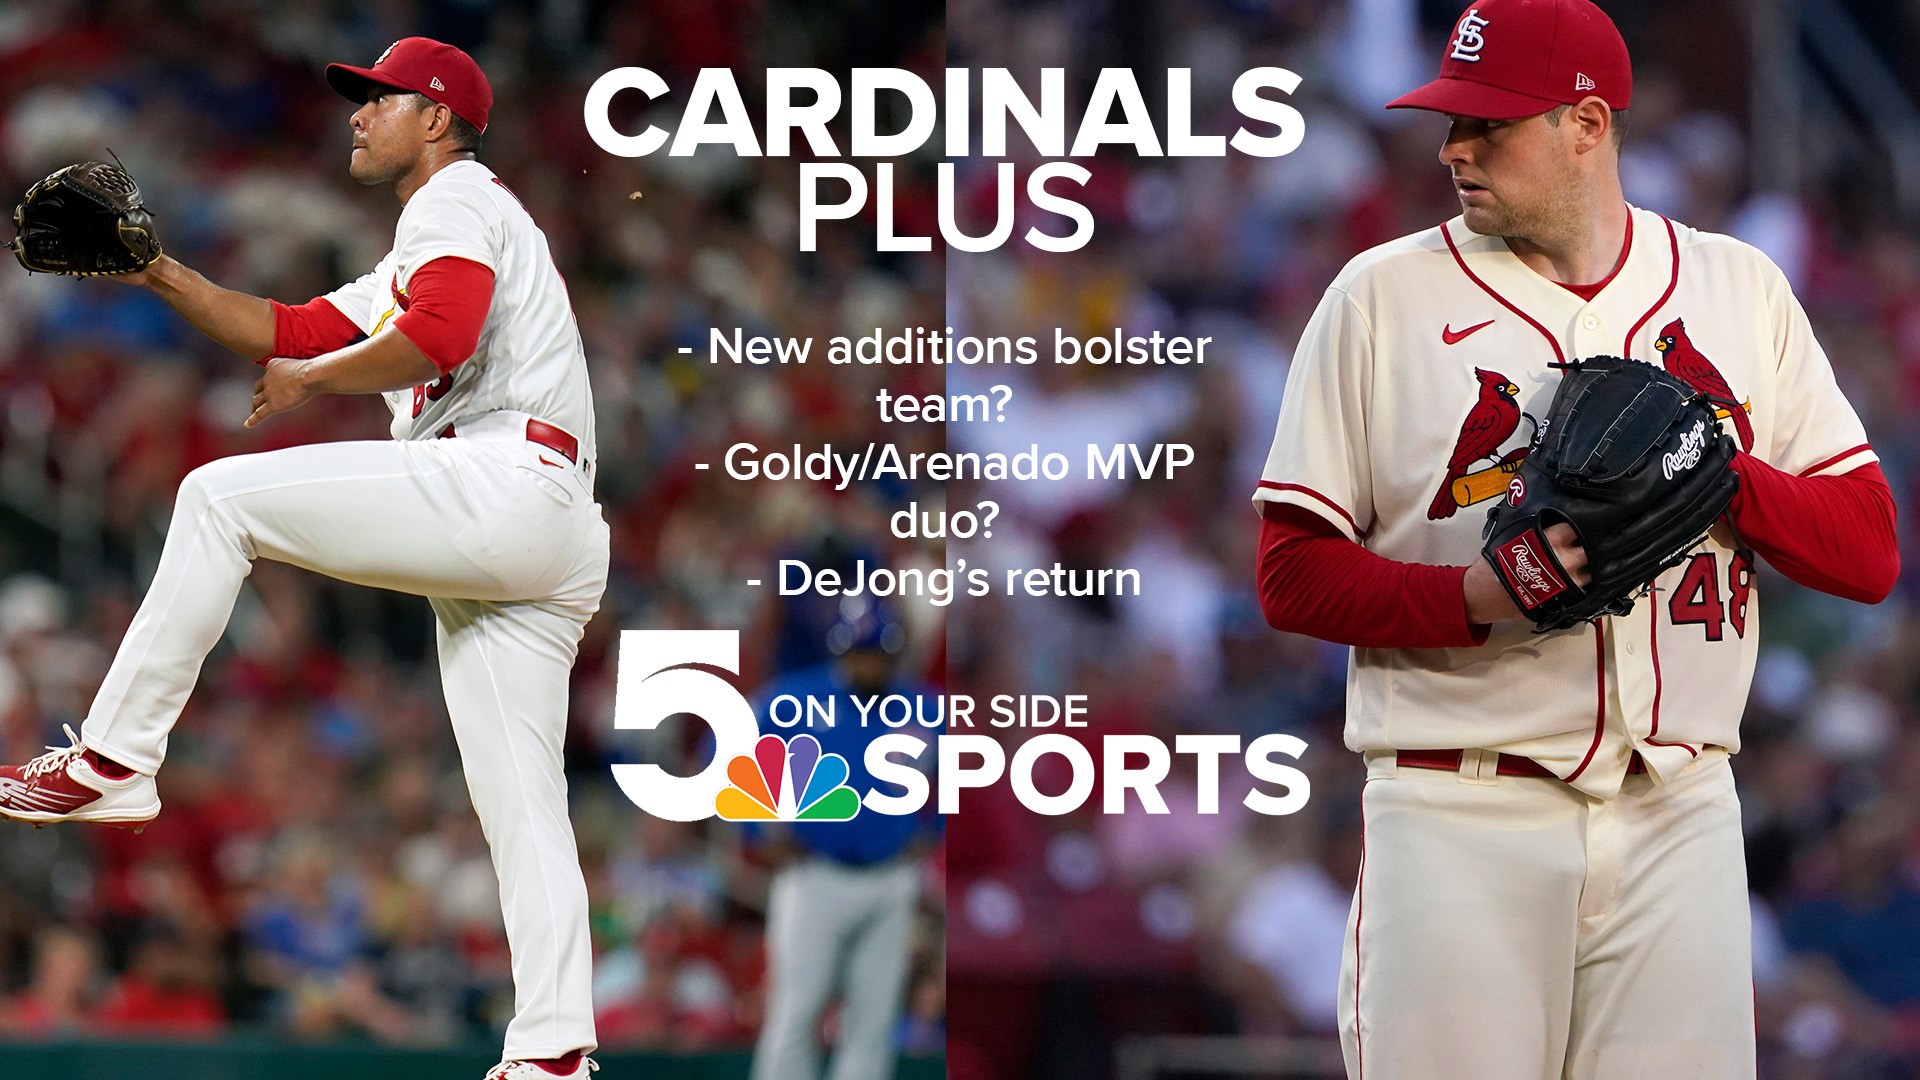 The Cardinals' new arms are off to a good start, Arenado and Goldschmidt are sizzling and DeJong is back in the fold. We talk it over on this episode of Cards Plus.